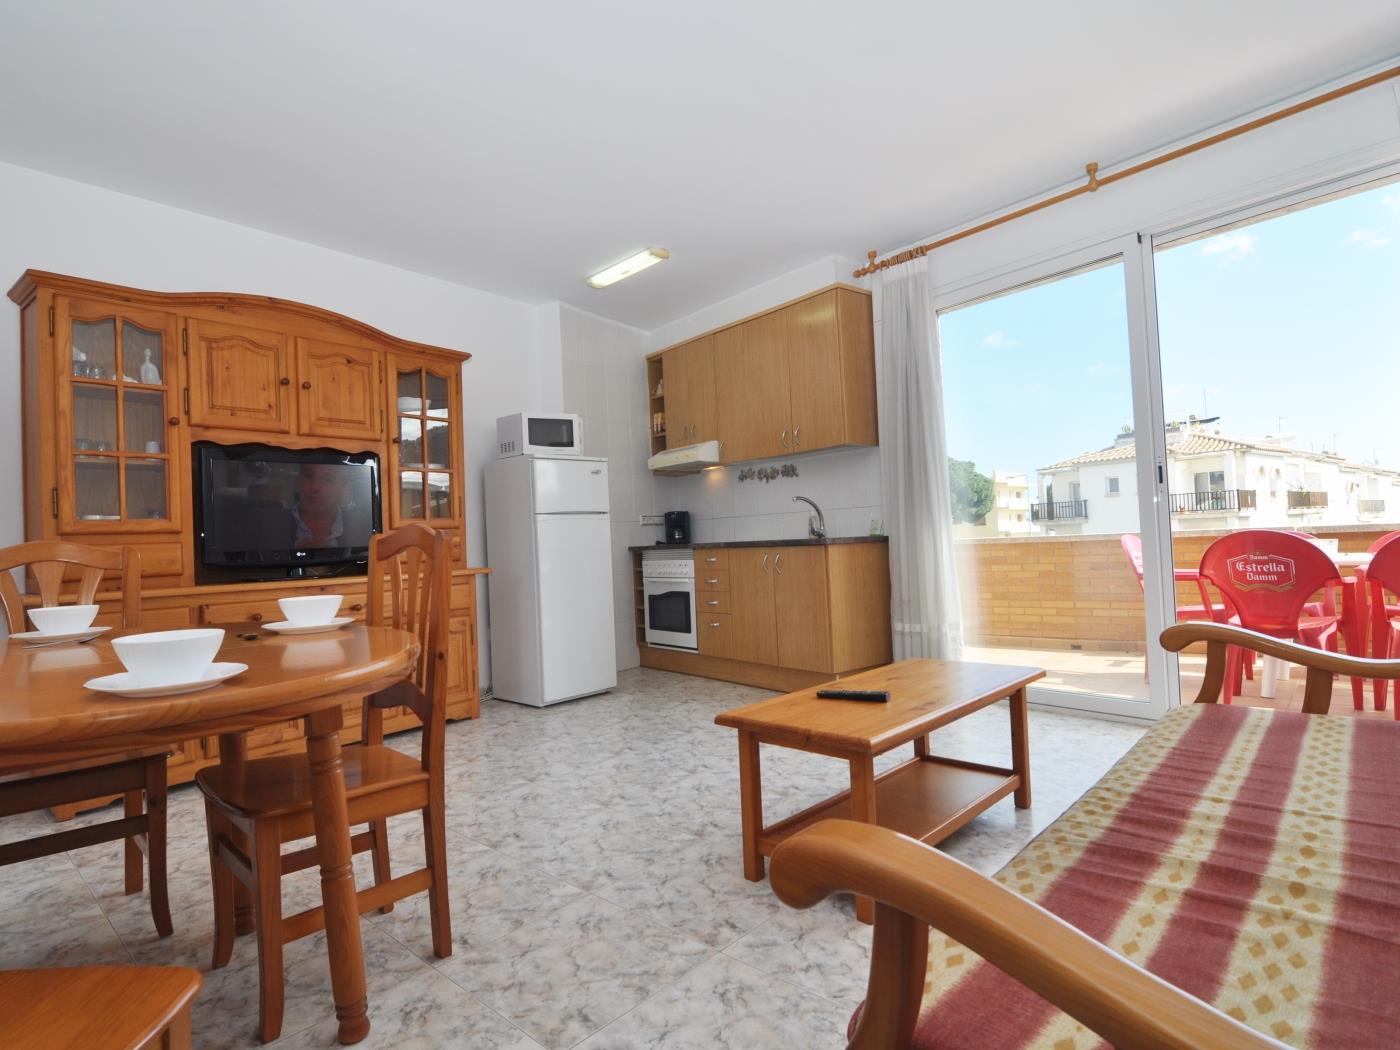 APARTMENT WITH POOL 2 MINUTES, ON FOOT, FROM THE BEACH. in l'Escala